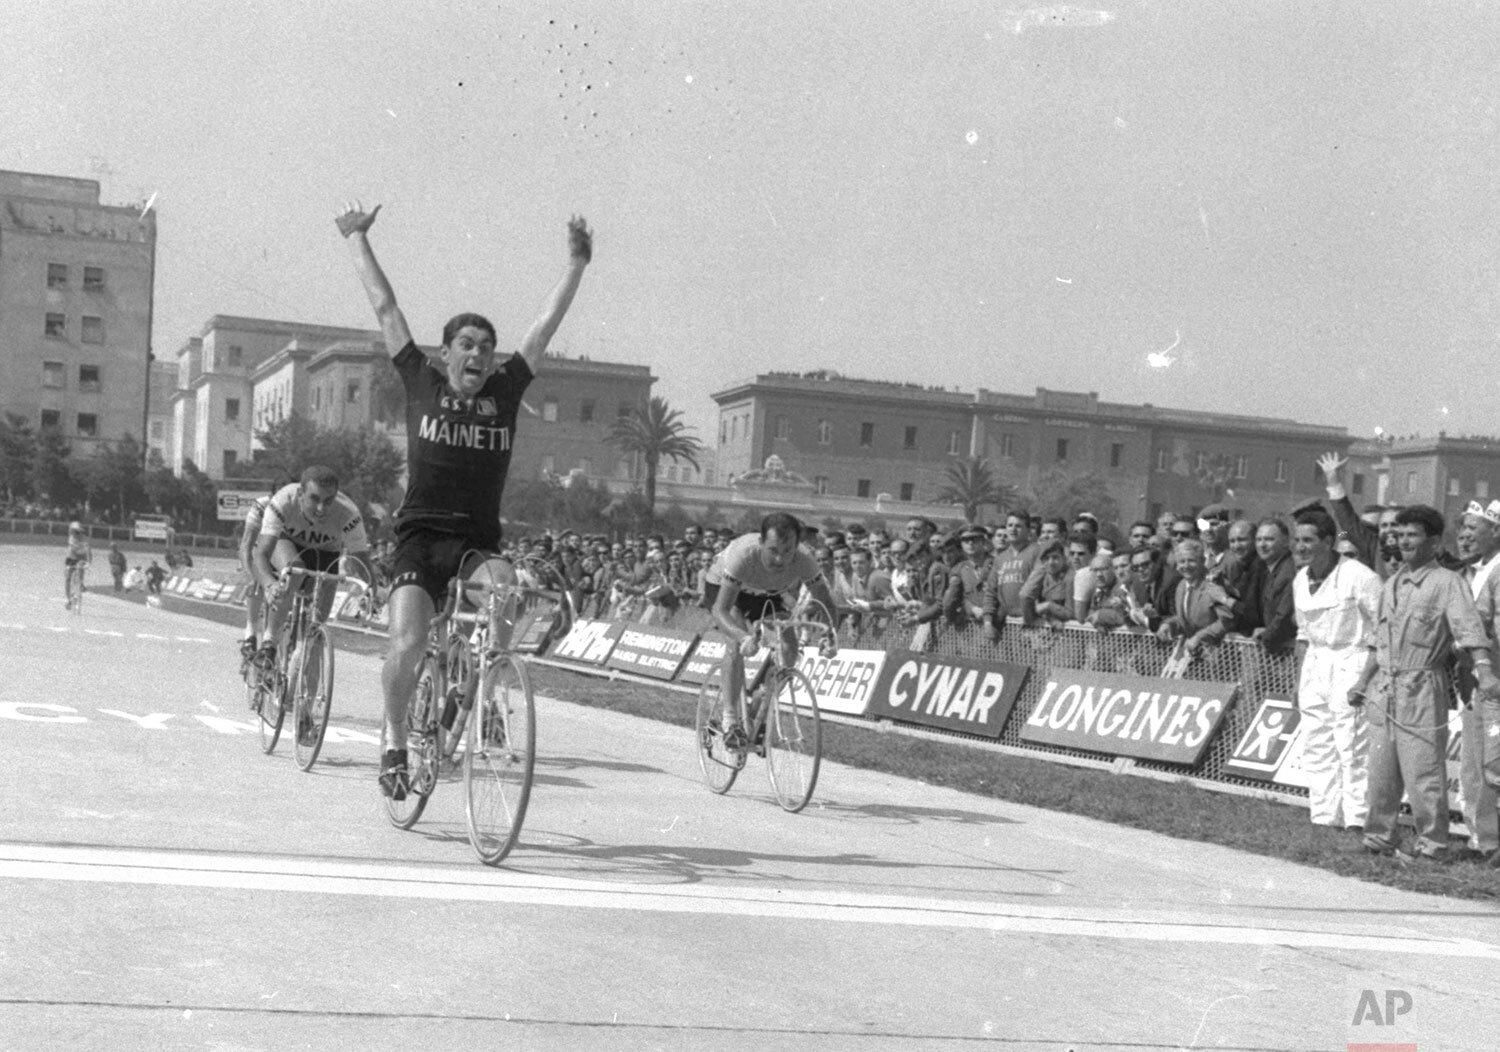  Marino Basso of Italy raises his arms as he passes the finish line to win the May 25,1966 eighth leg of the Tour of Italy bicycle race, the 238 kilometer downhill leg from Rocca de Cambio in the Appennines to Naples.  (AP Photo) 